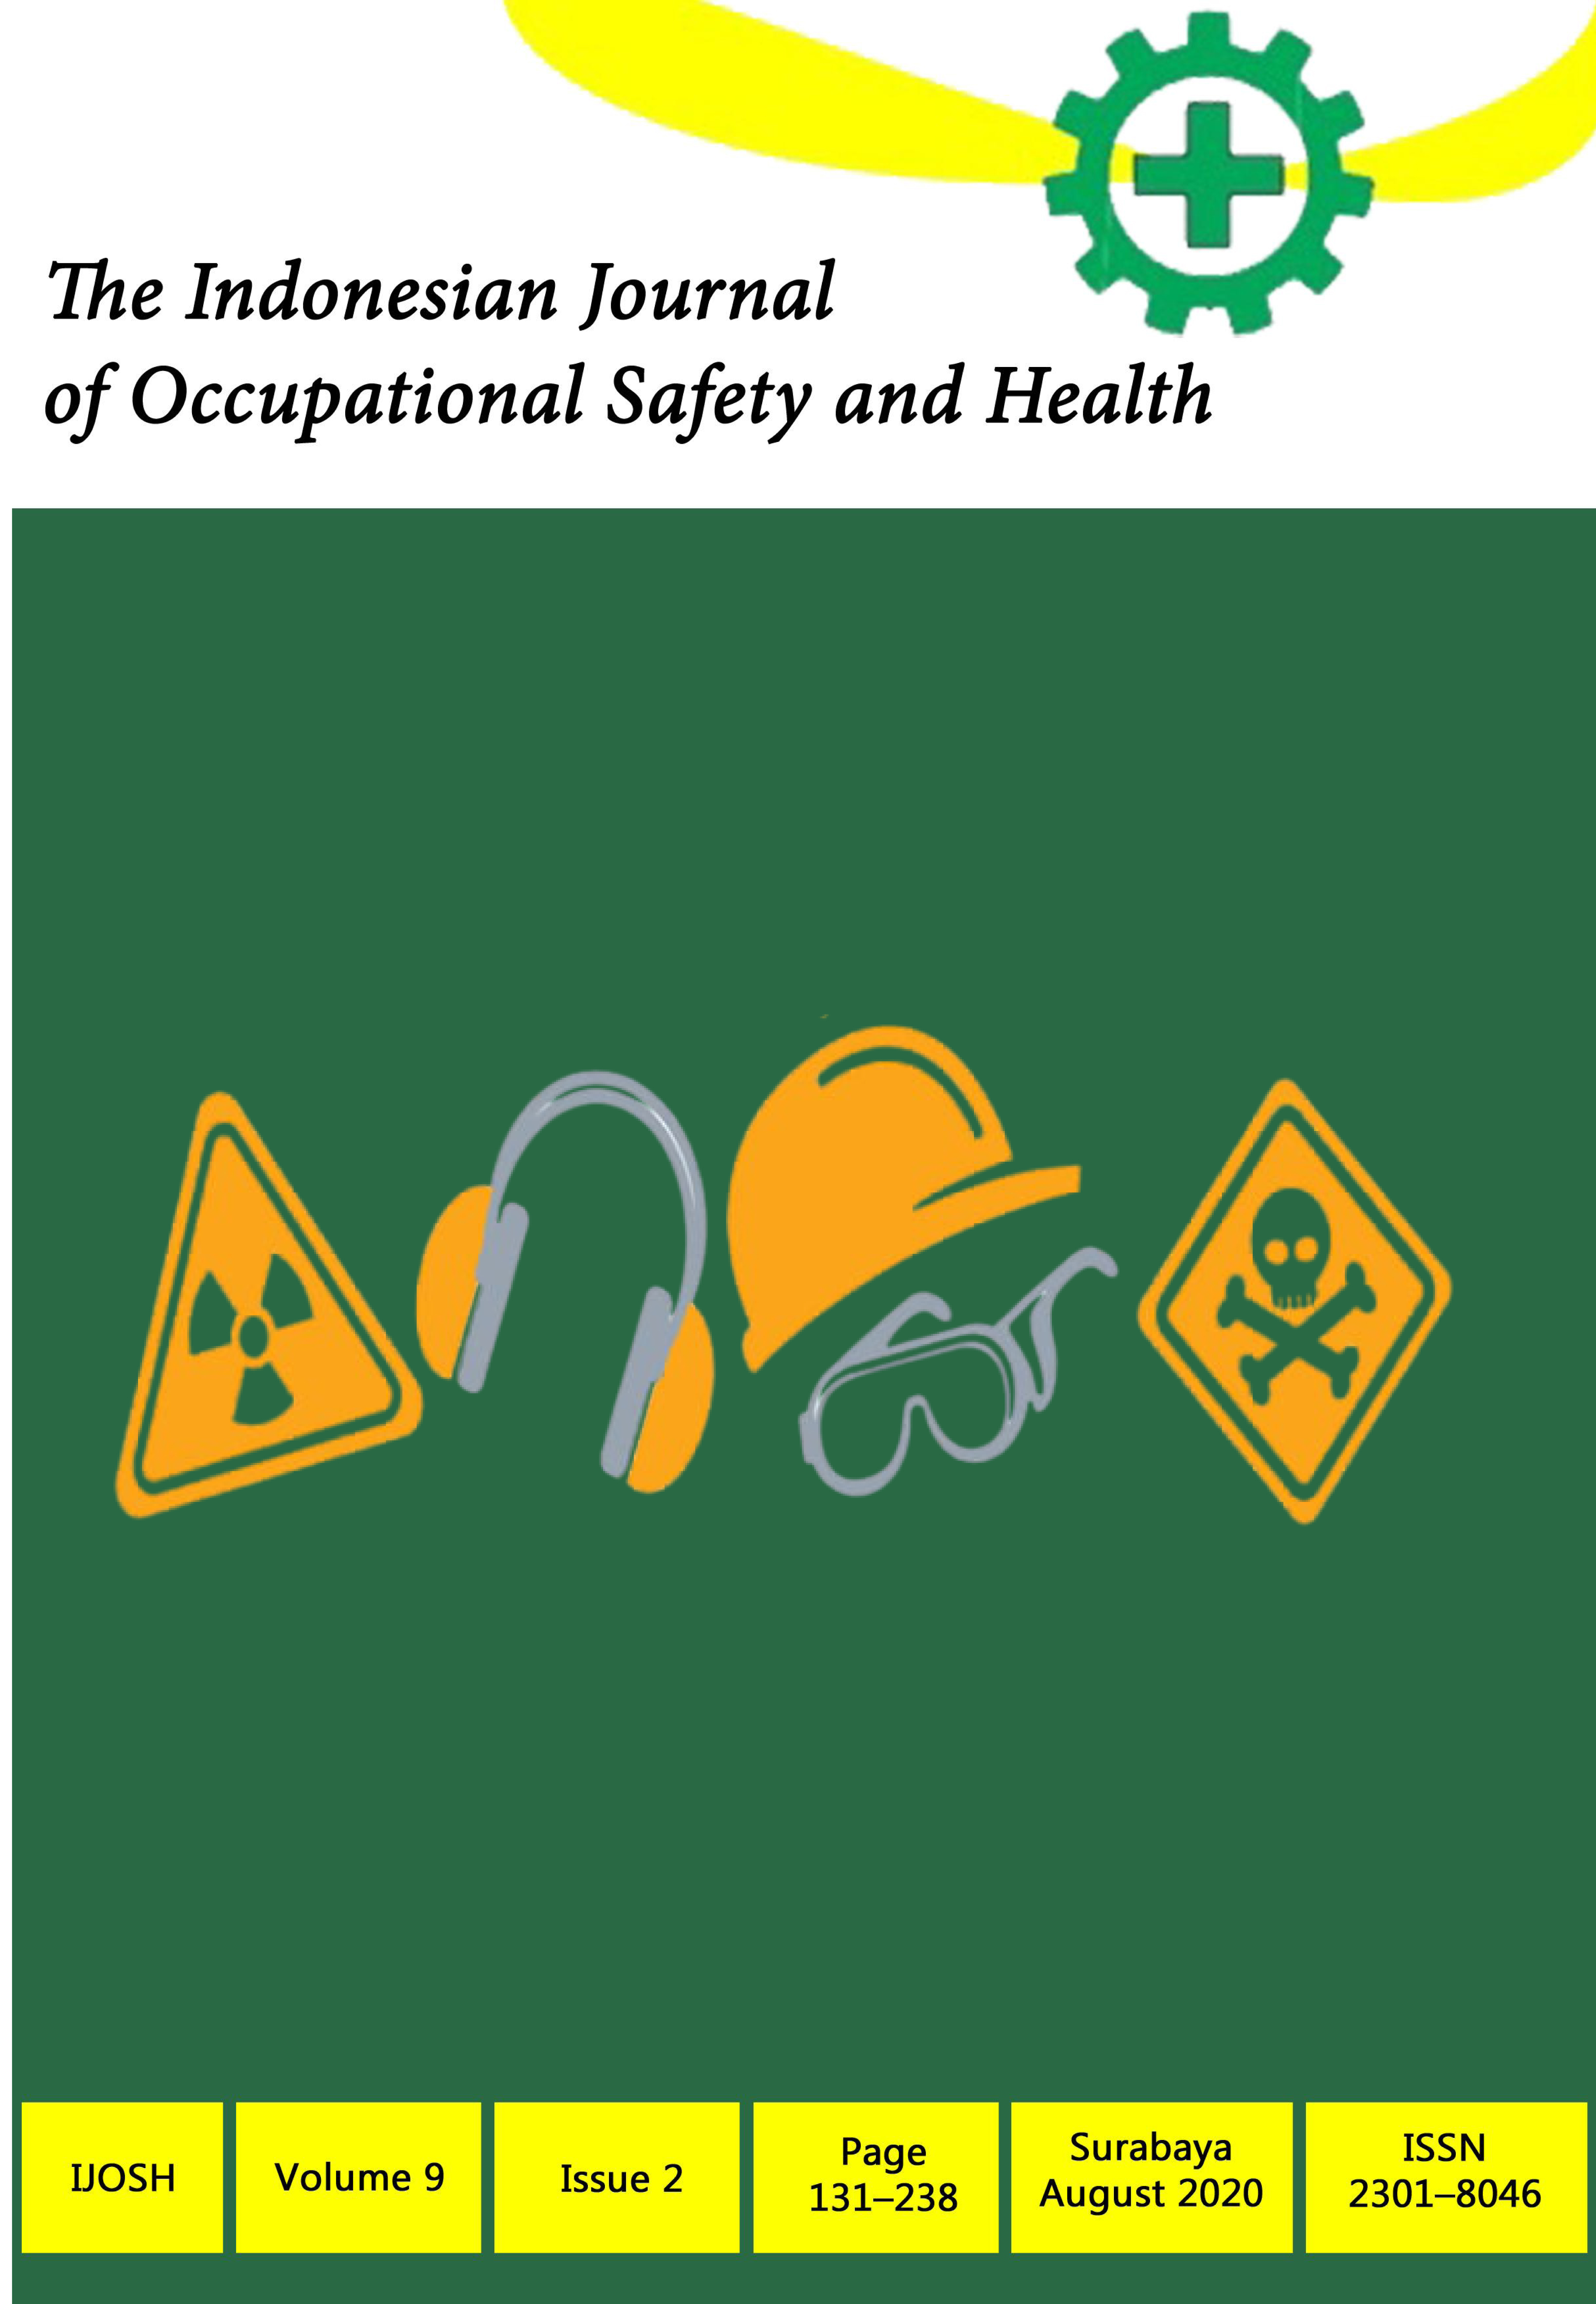 						View Vol. 9 No. 2 (2020): The Indonesian Journal of Occupational Safety and Health
					